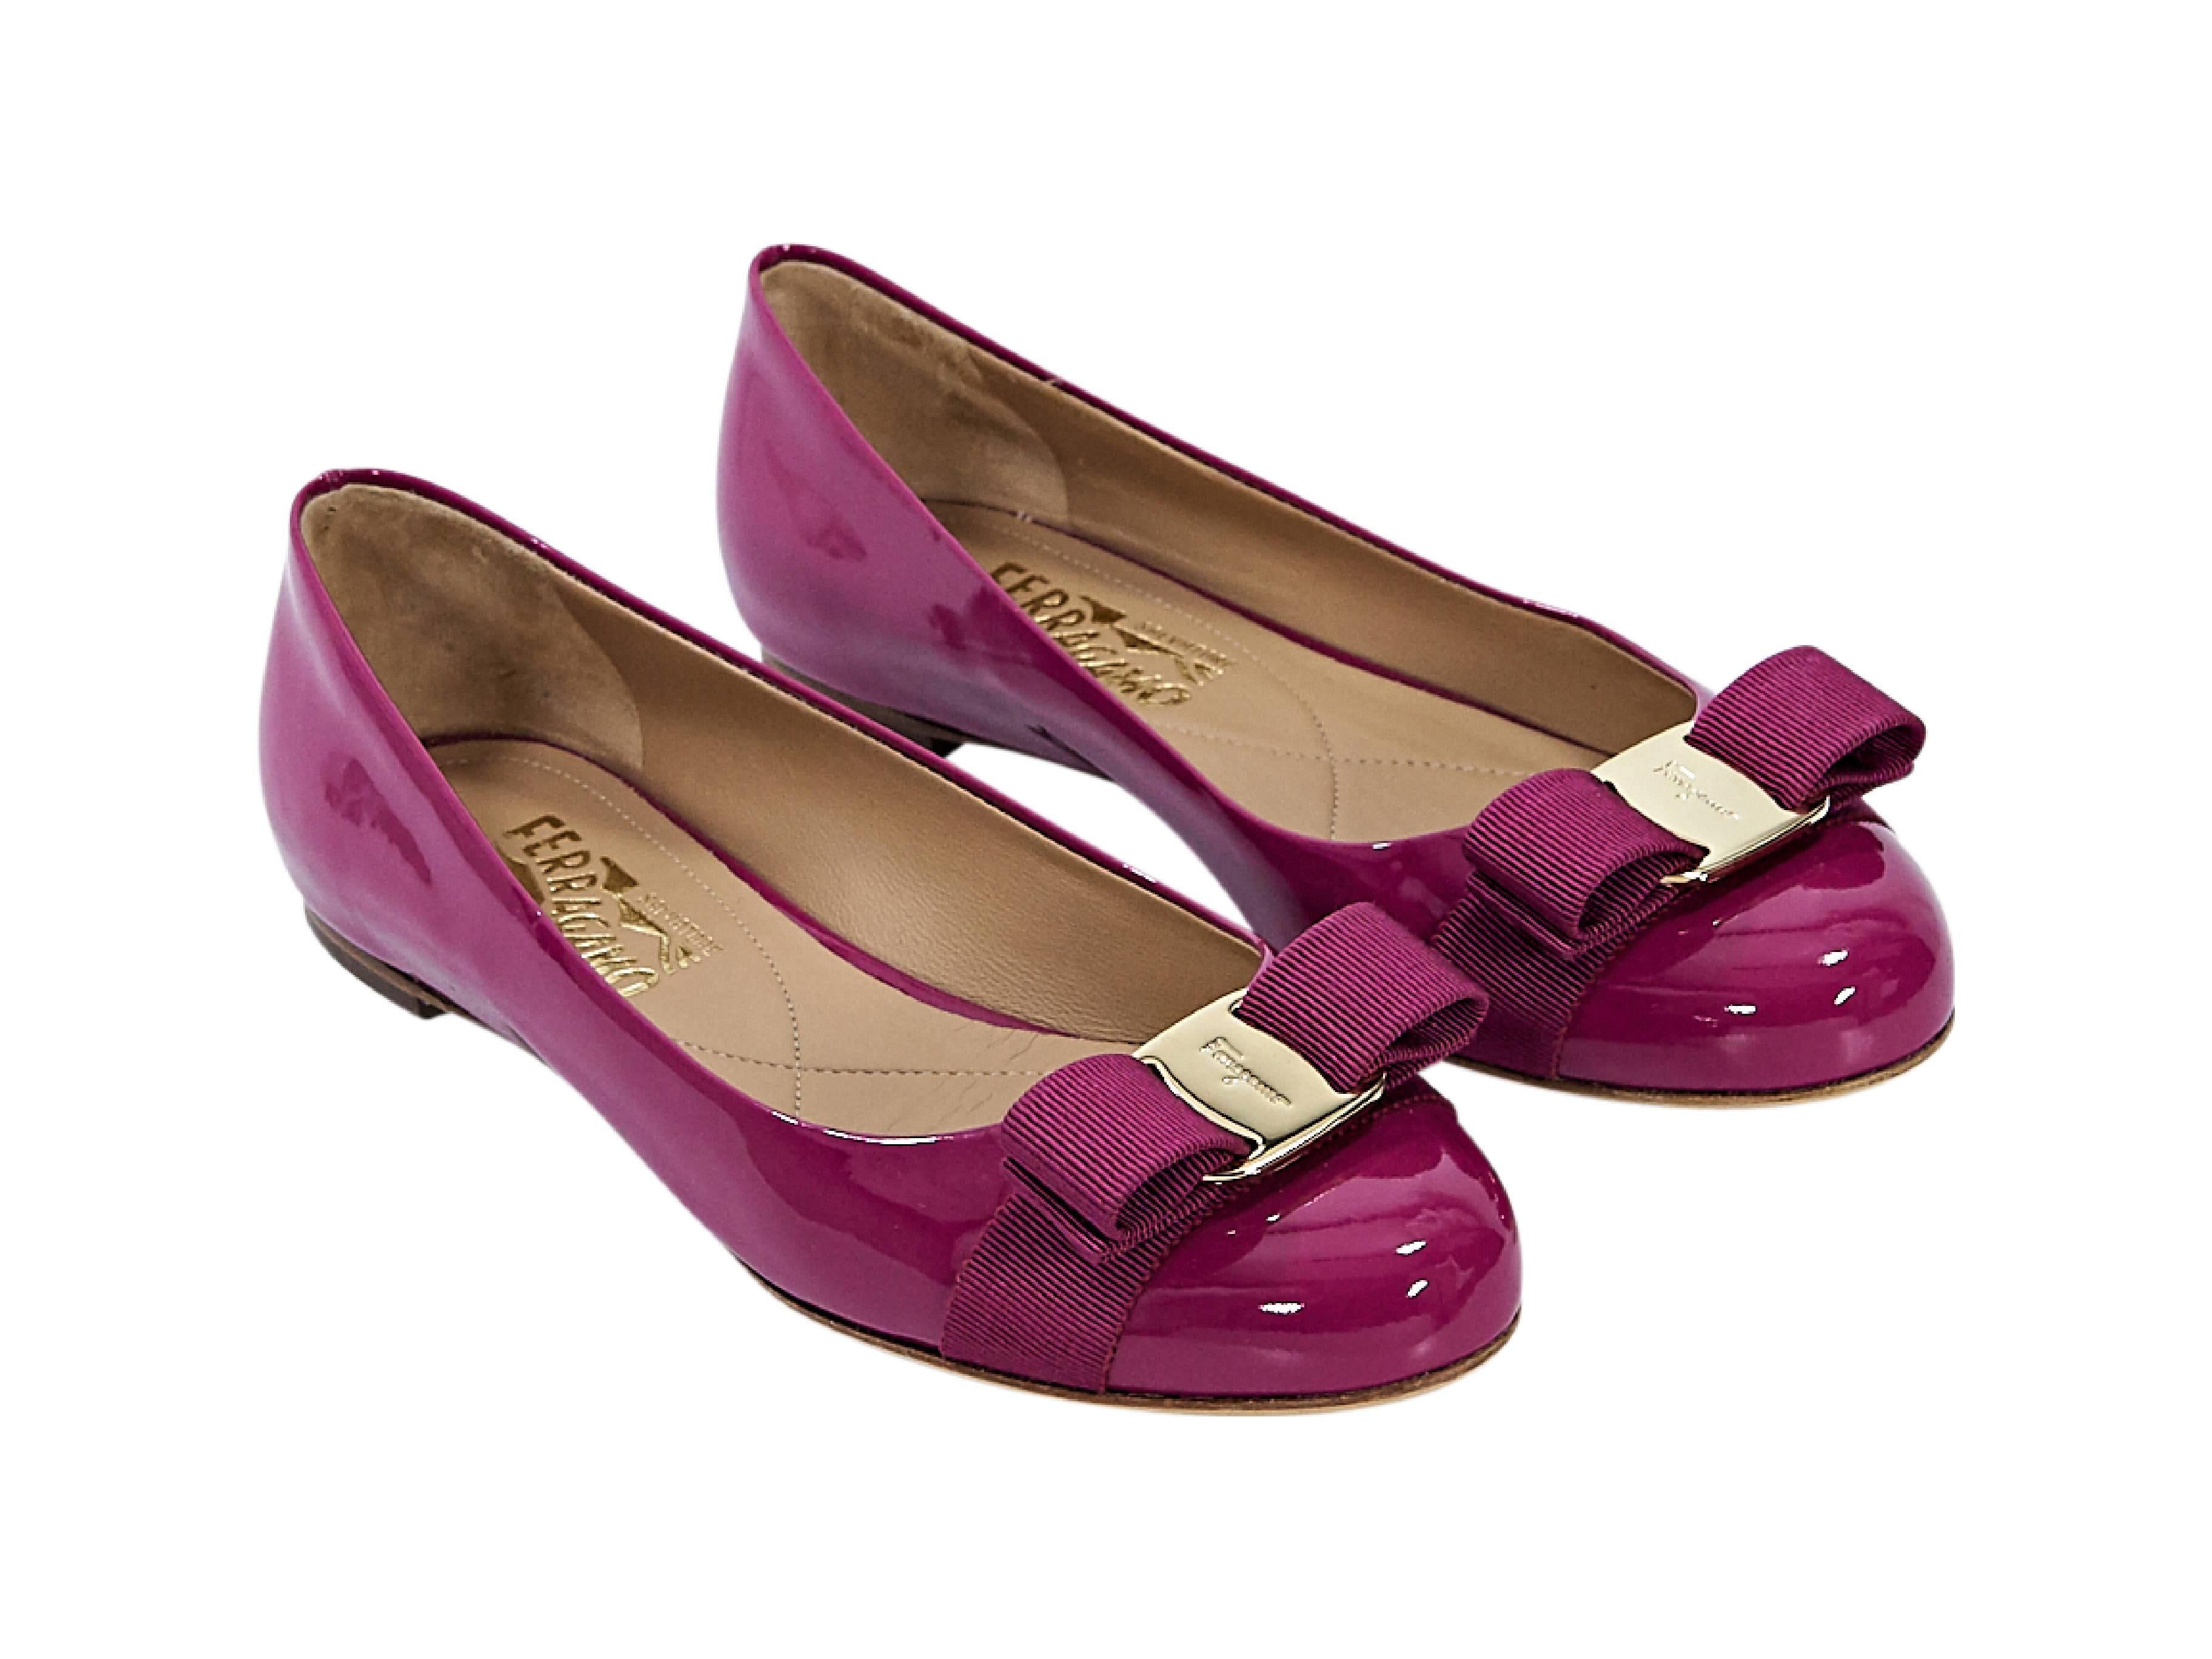 Product details:  Magenta patent leather Vara ballet flats by Salvatore Ferragamo.  Grosgrain bow accents vamp.  Round toe.  Slip-on style. Size 7
Condition: Pre-owned. Very good.

Est. Retail $ 595.00